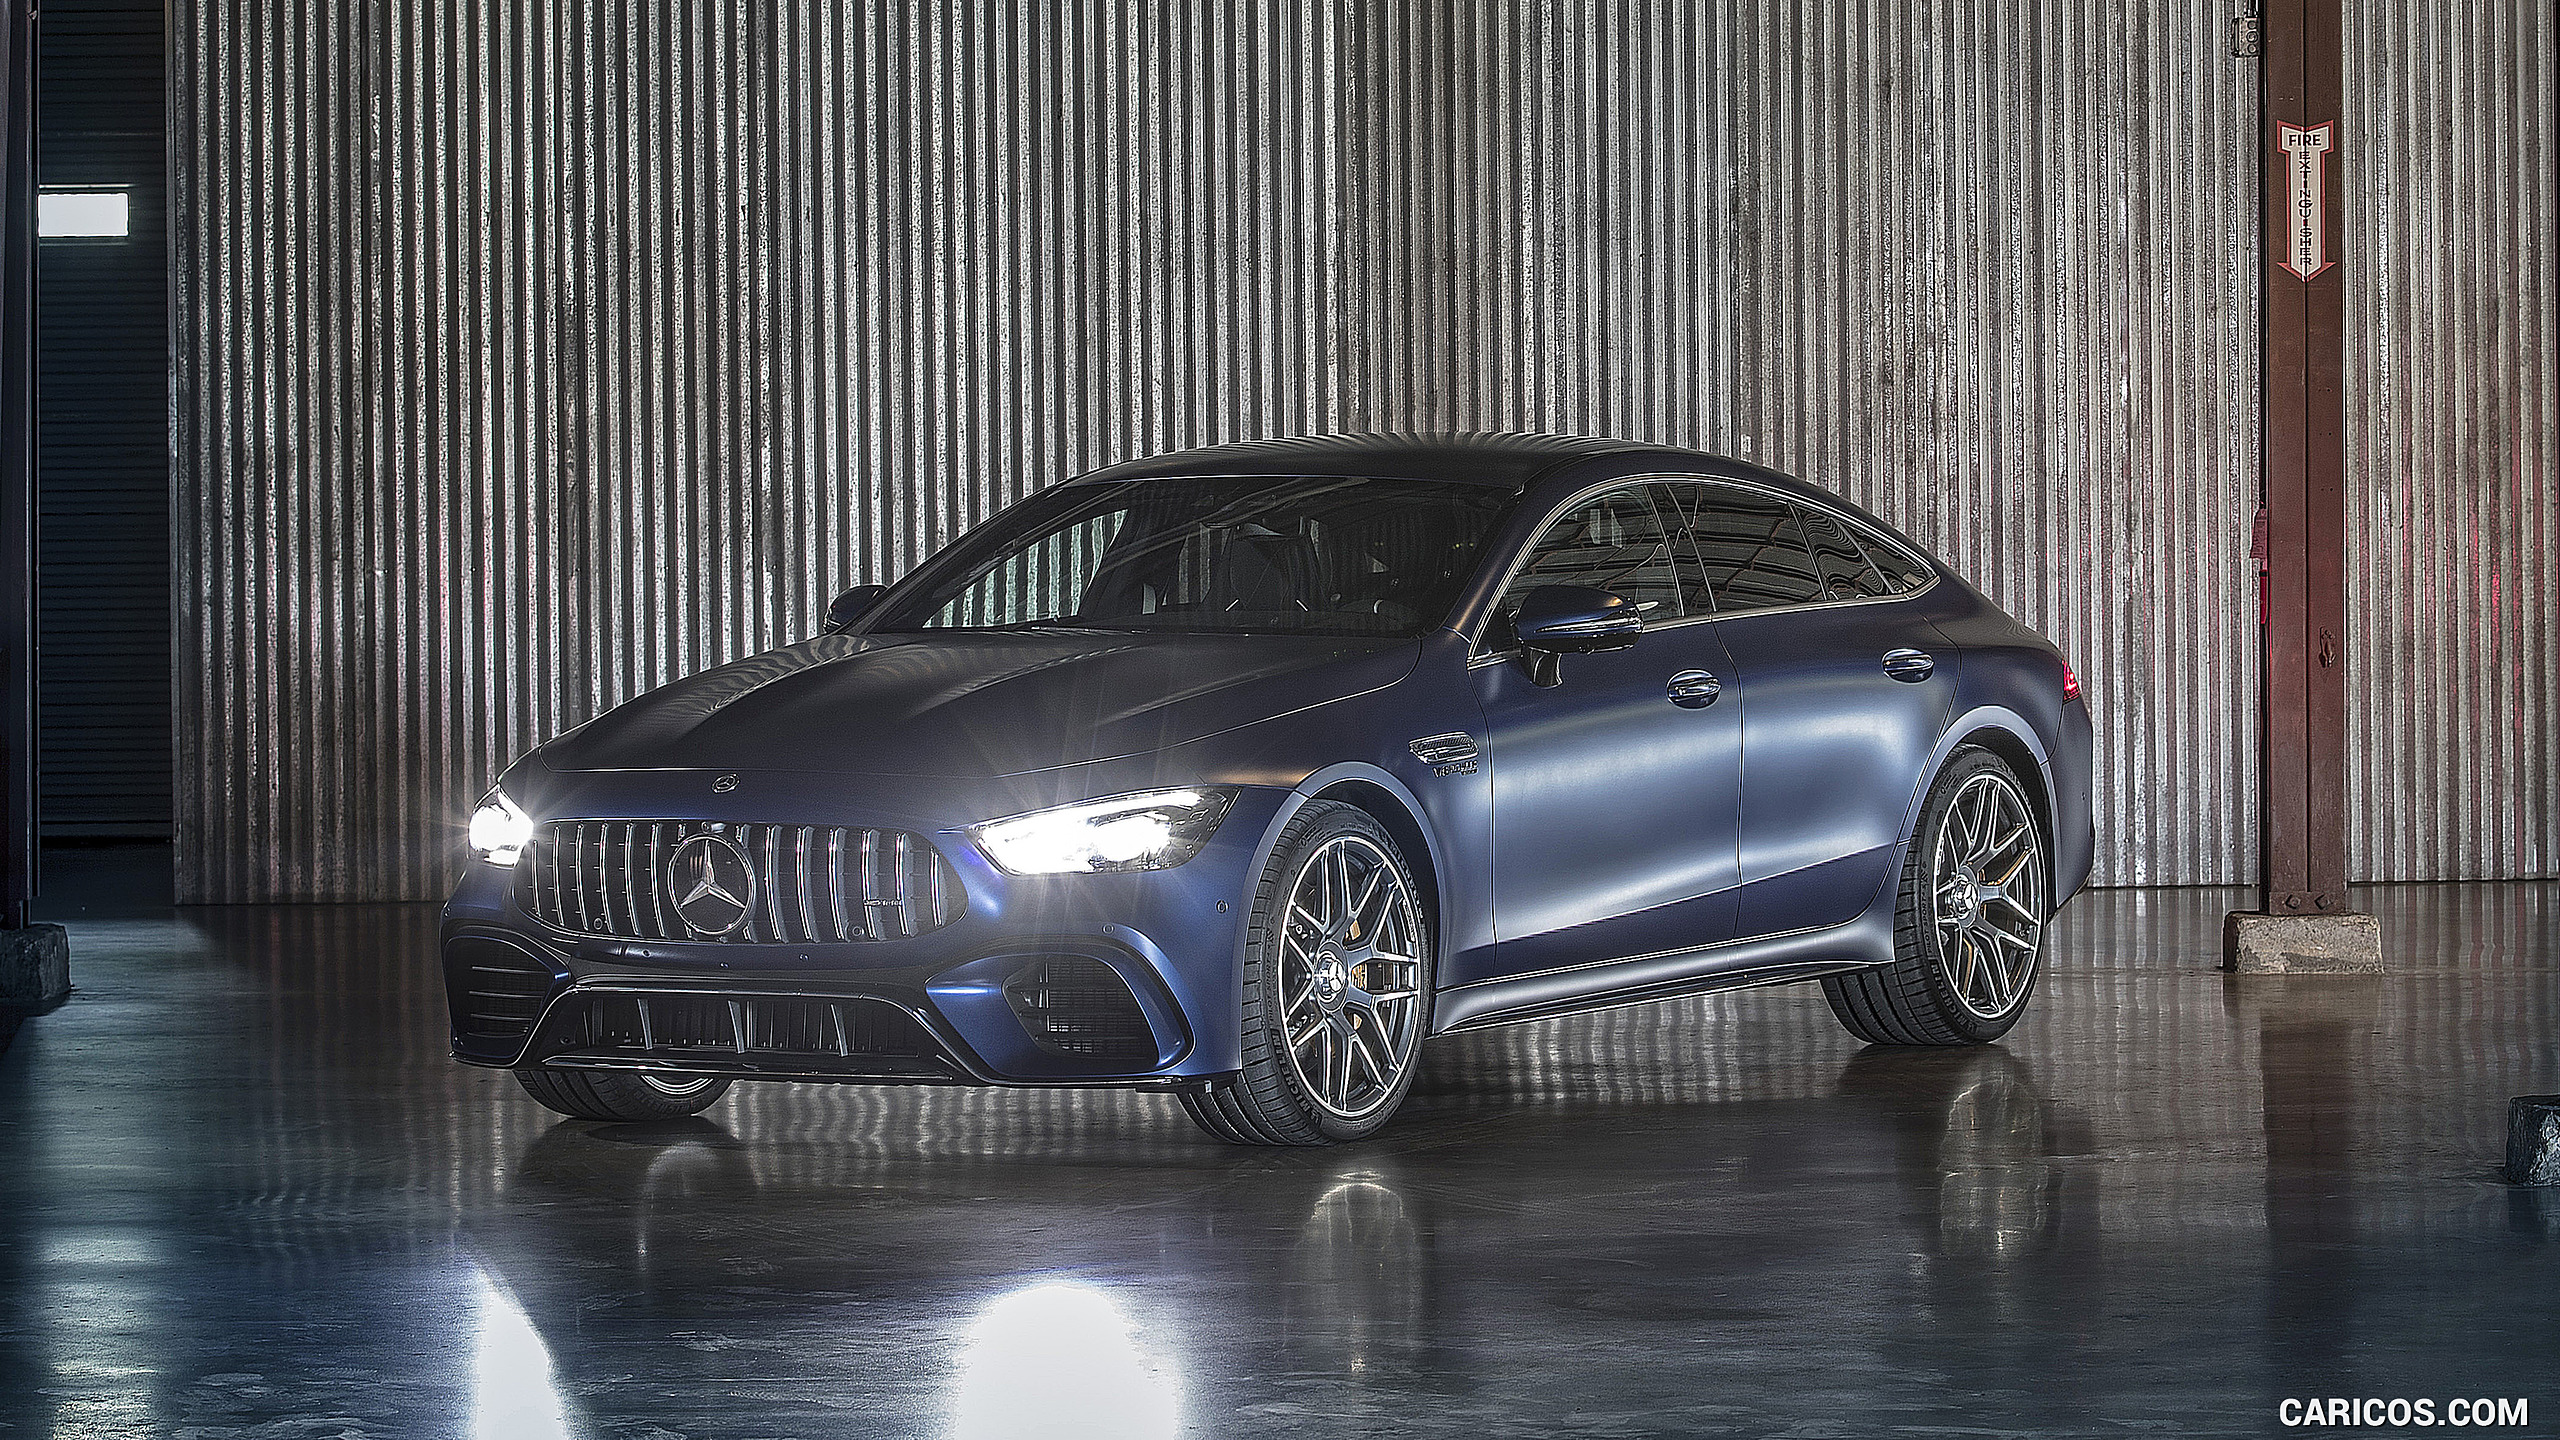 2019 Mercedes-AMG GT 63 S 4MATIC+ 4-Door Coupe - Front Three-Quarter, #136 of 427